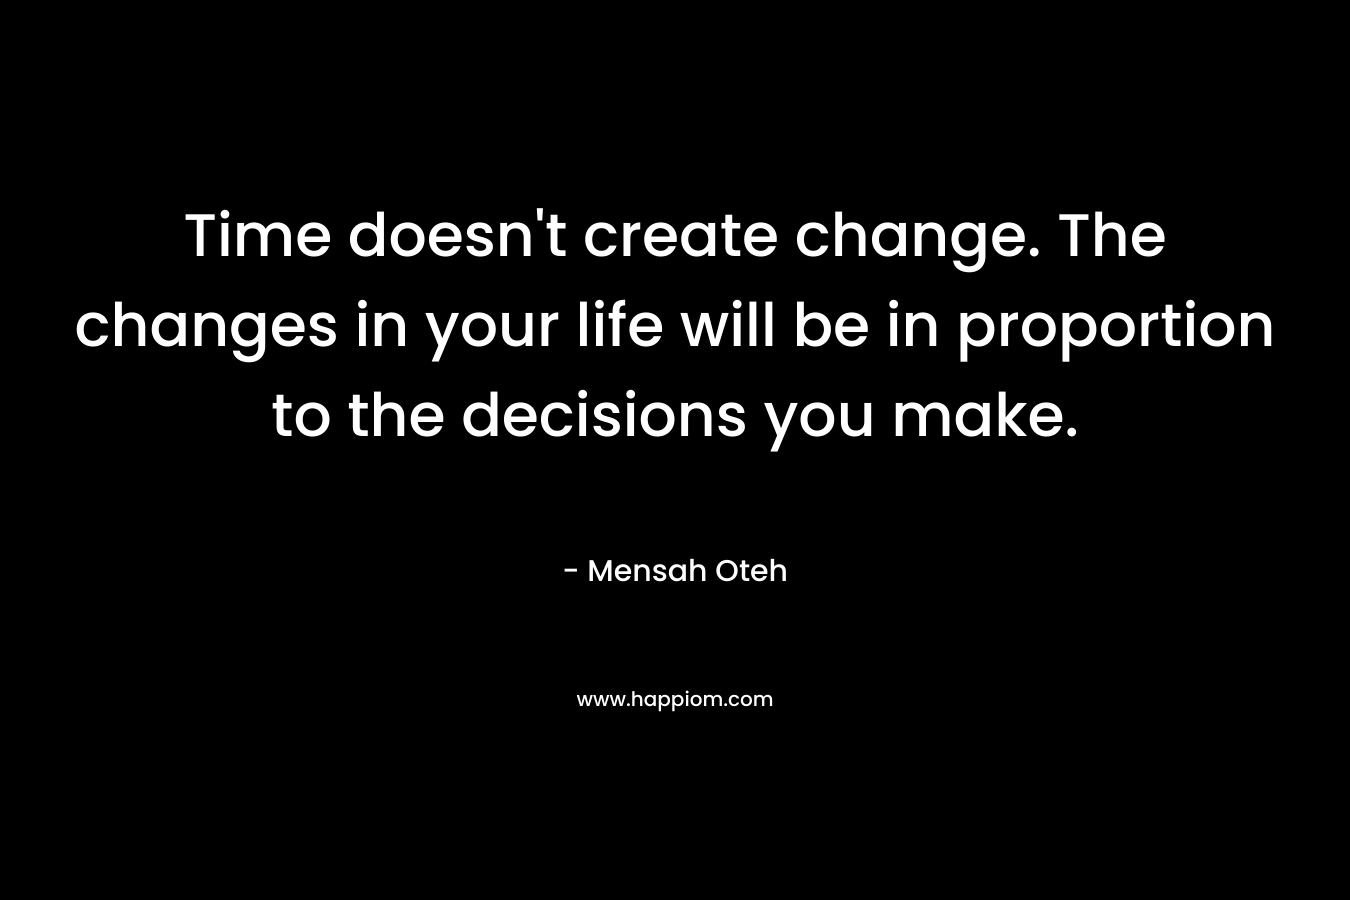 Time doesn't create change. The changes in your life will be in proportion to the decisions you make.